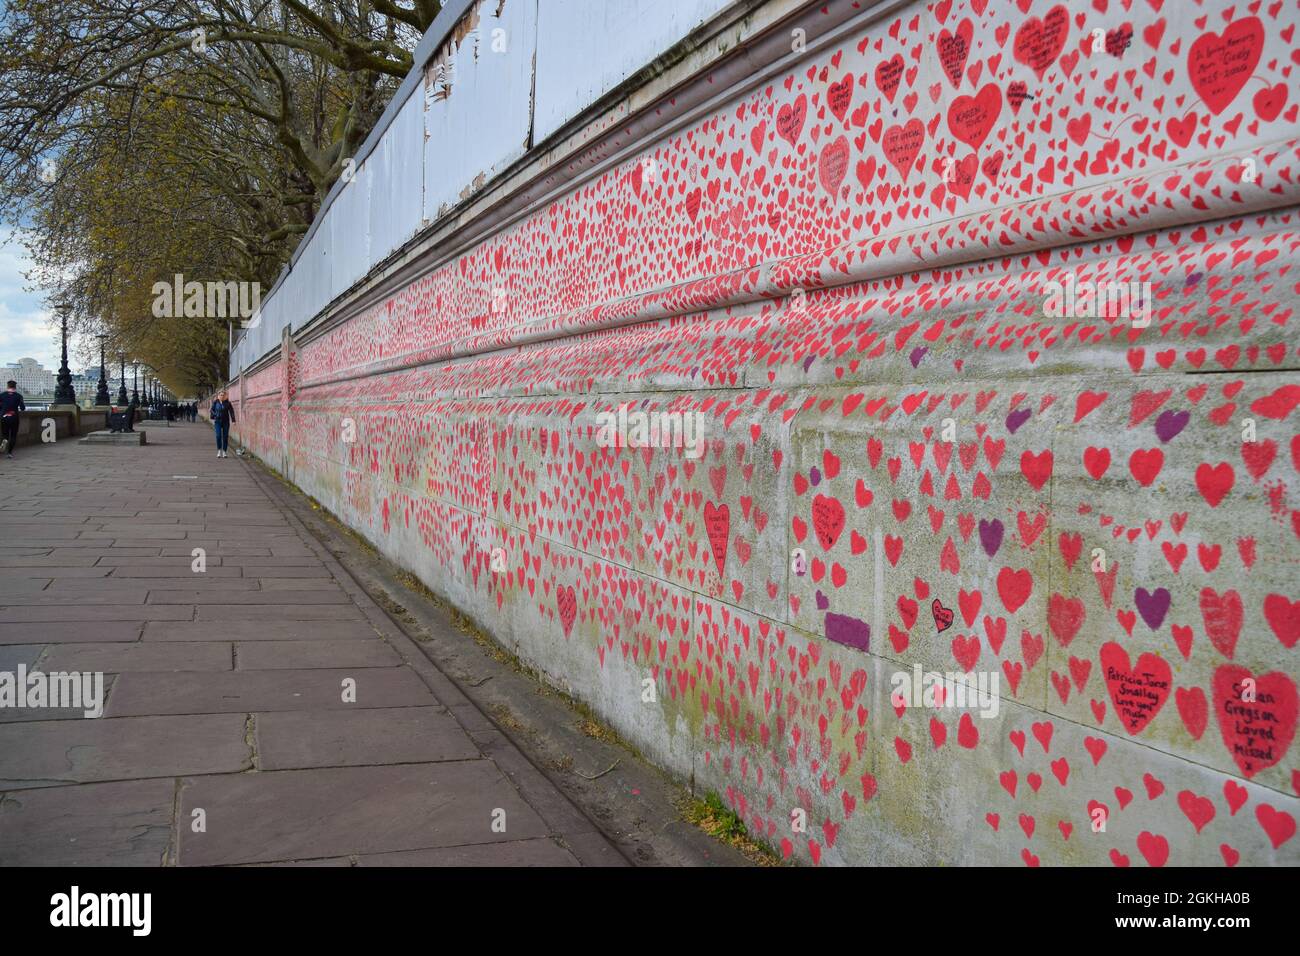 Red hearts on the National Covid Memorial Wall outside St Thomas' Hospital. 150,000 red hearts have been painted by volunteers and members of the public, one for each life lost to Covid in the UK to date. London, United Kingdom April 2021. Stock Photo